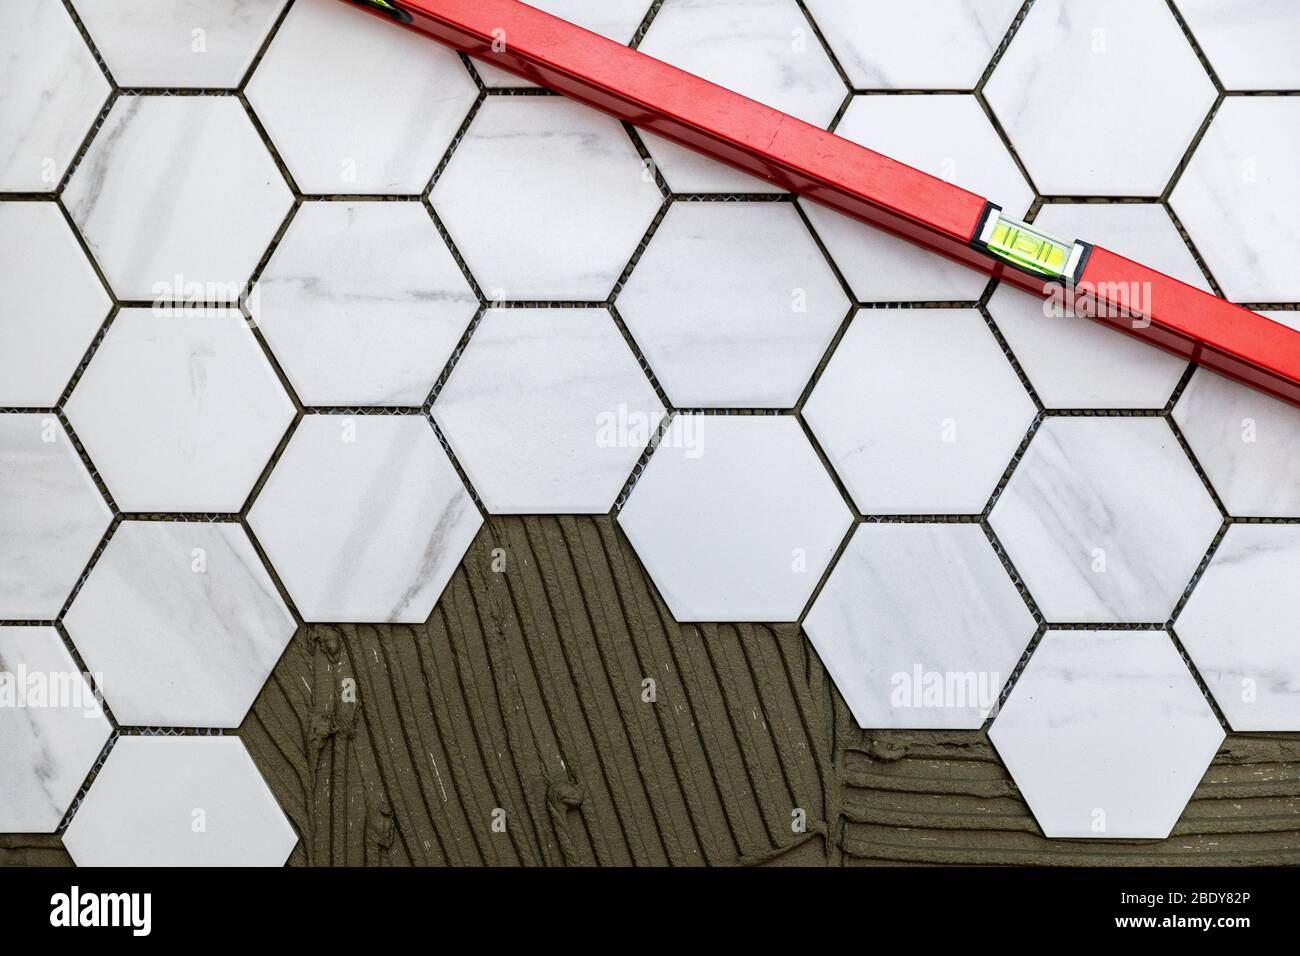 tiling - laying marble texture hexagon tiles on the floor Stock Photo